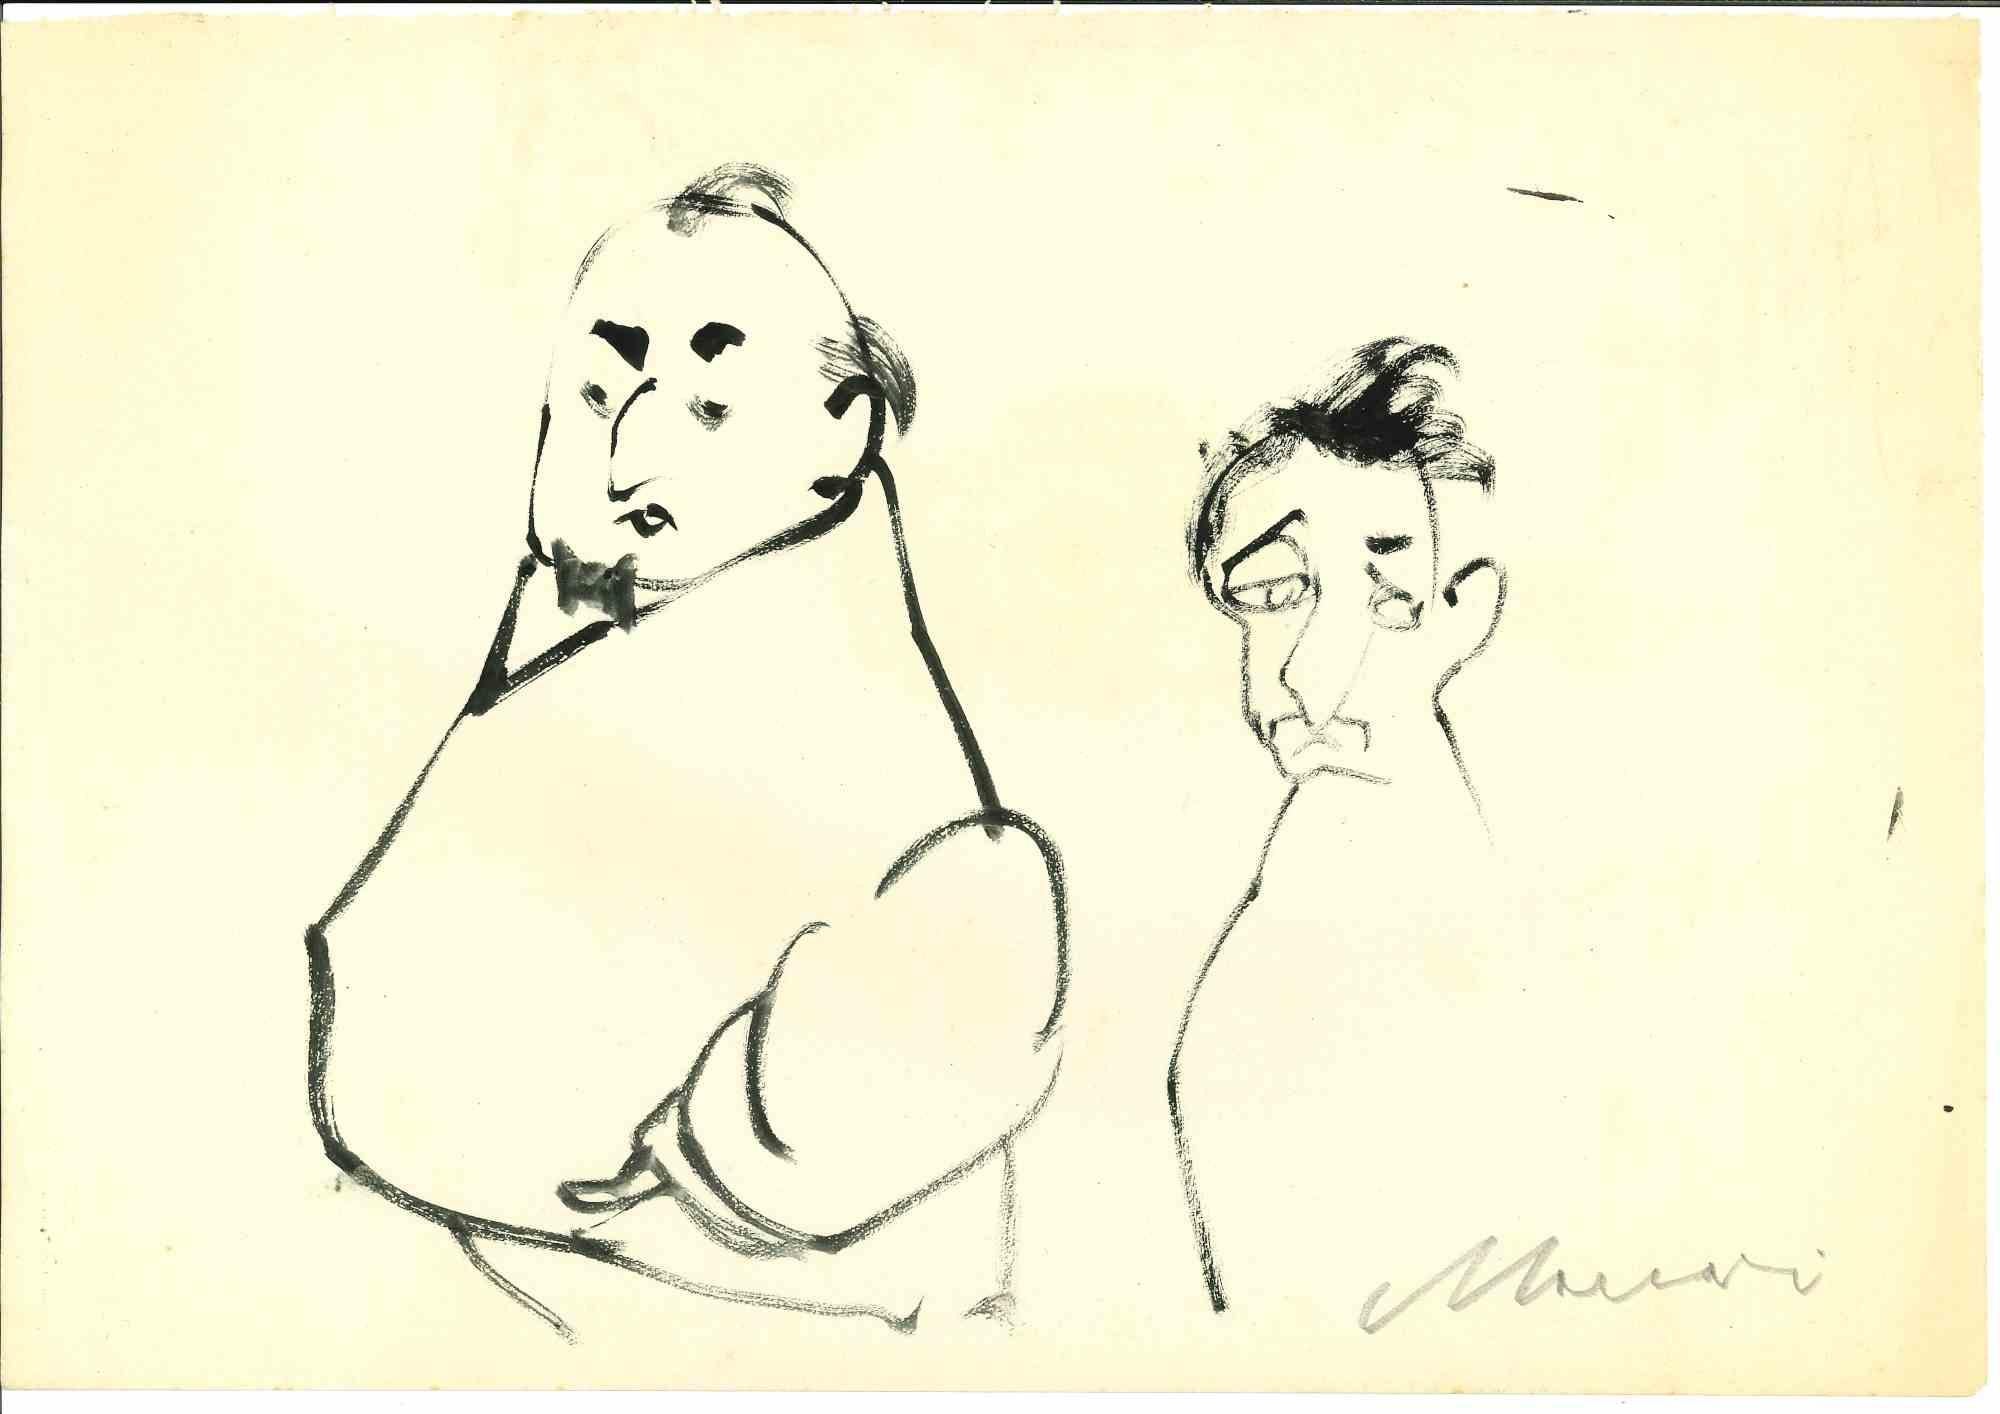 Figures is a black marker Drawing realized by Mino Maccari  (1924-1989) in the Mid-20th Century.

Hand-signed on the lower.

Good conditions.

Drawing realized by Mino Maccari  (1924-1989) in the Mid-20th Century.

Hand-signed on the lower.

Good